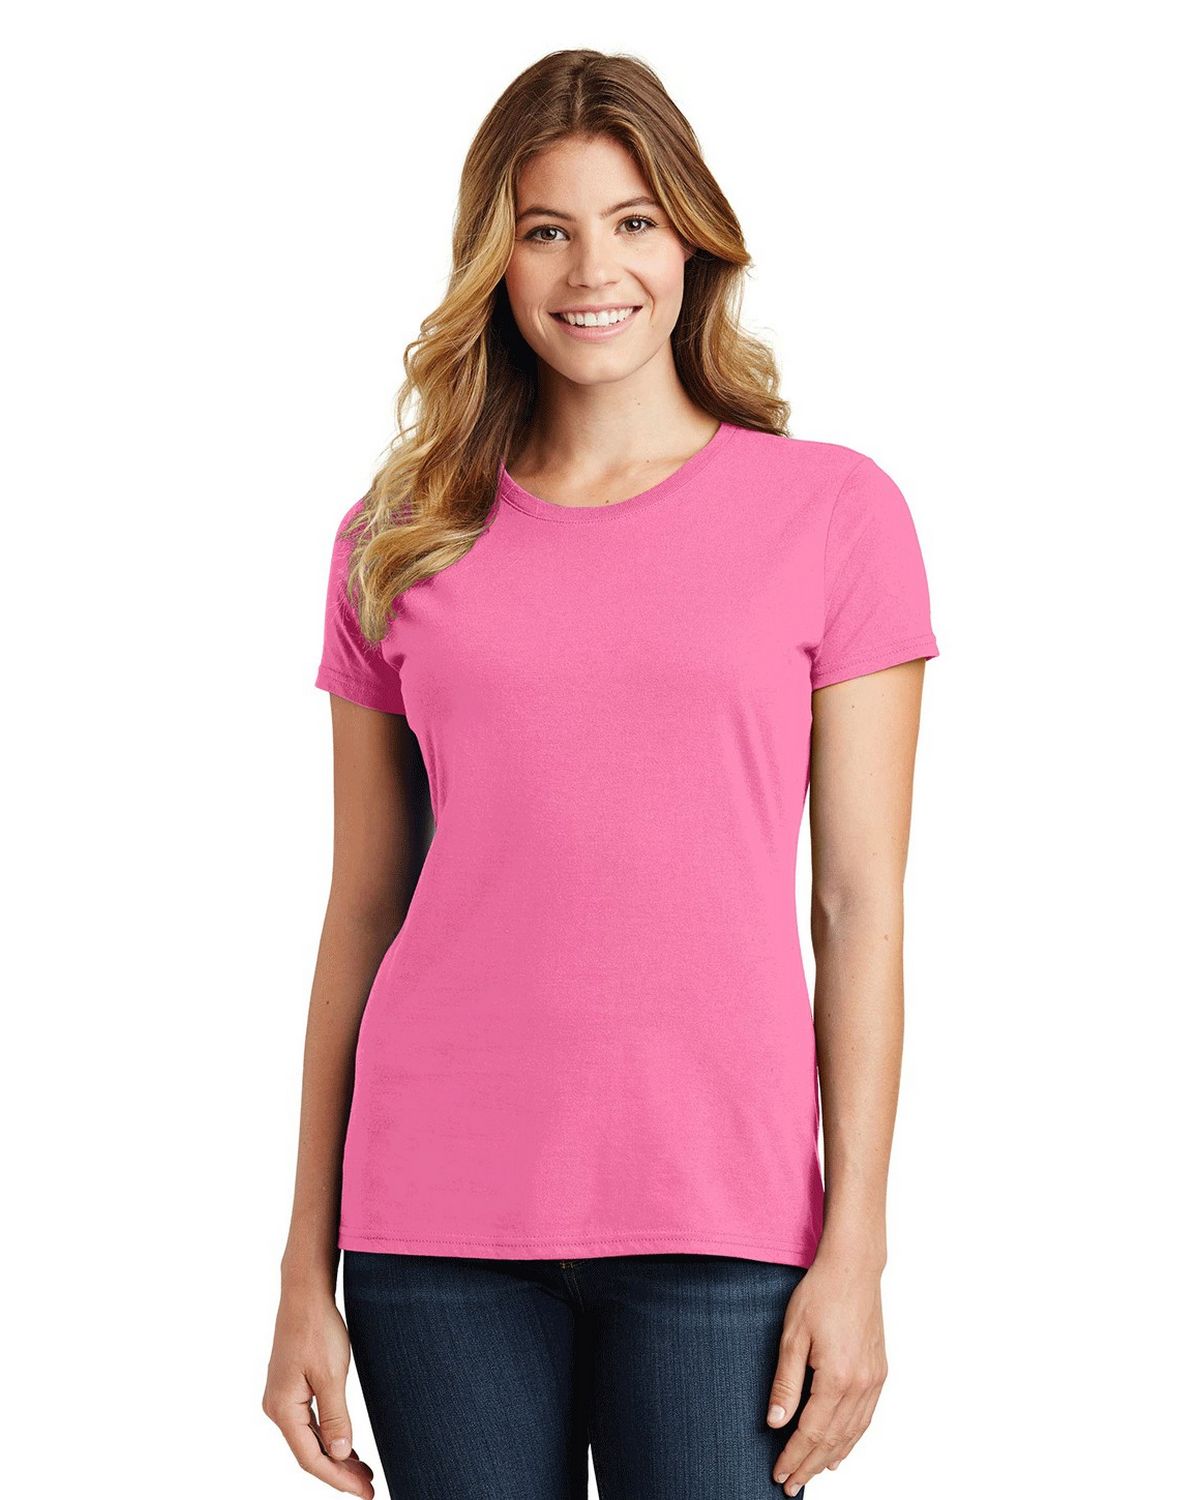 Port & Company LPC450 Ladies Fan Favorite Tee - Free Shipping Available